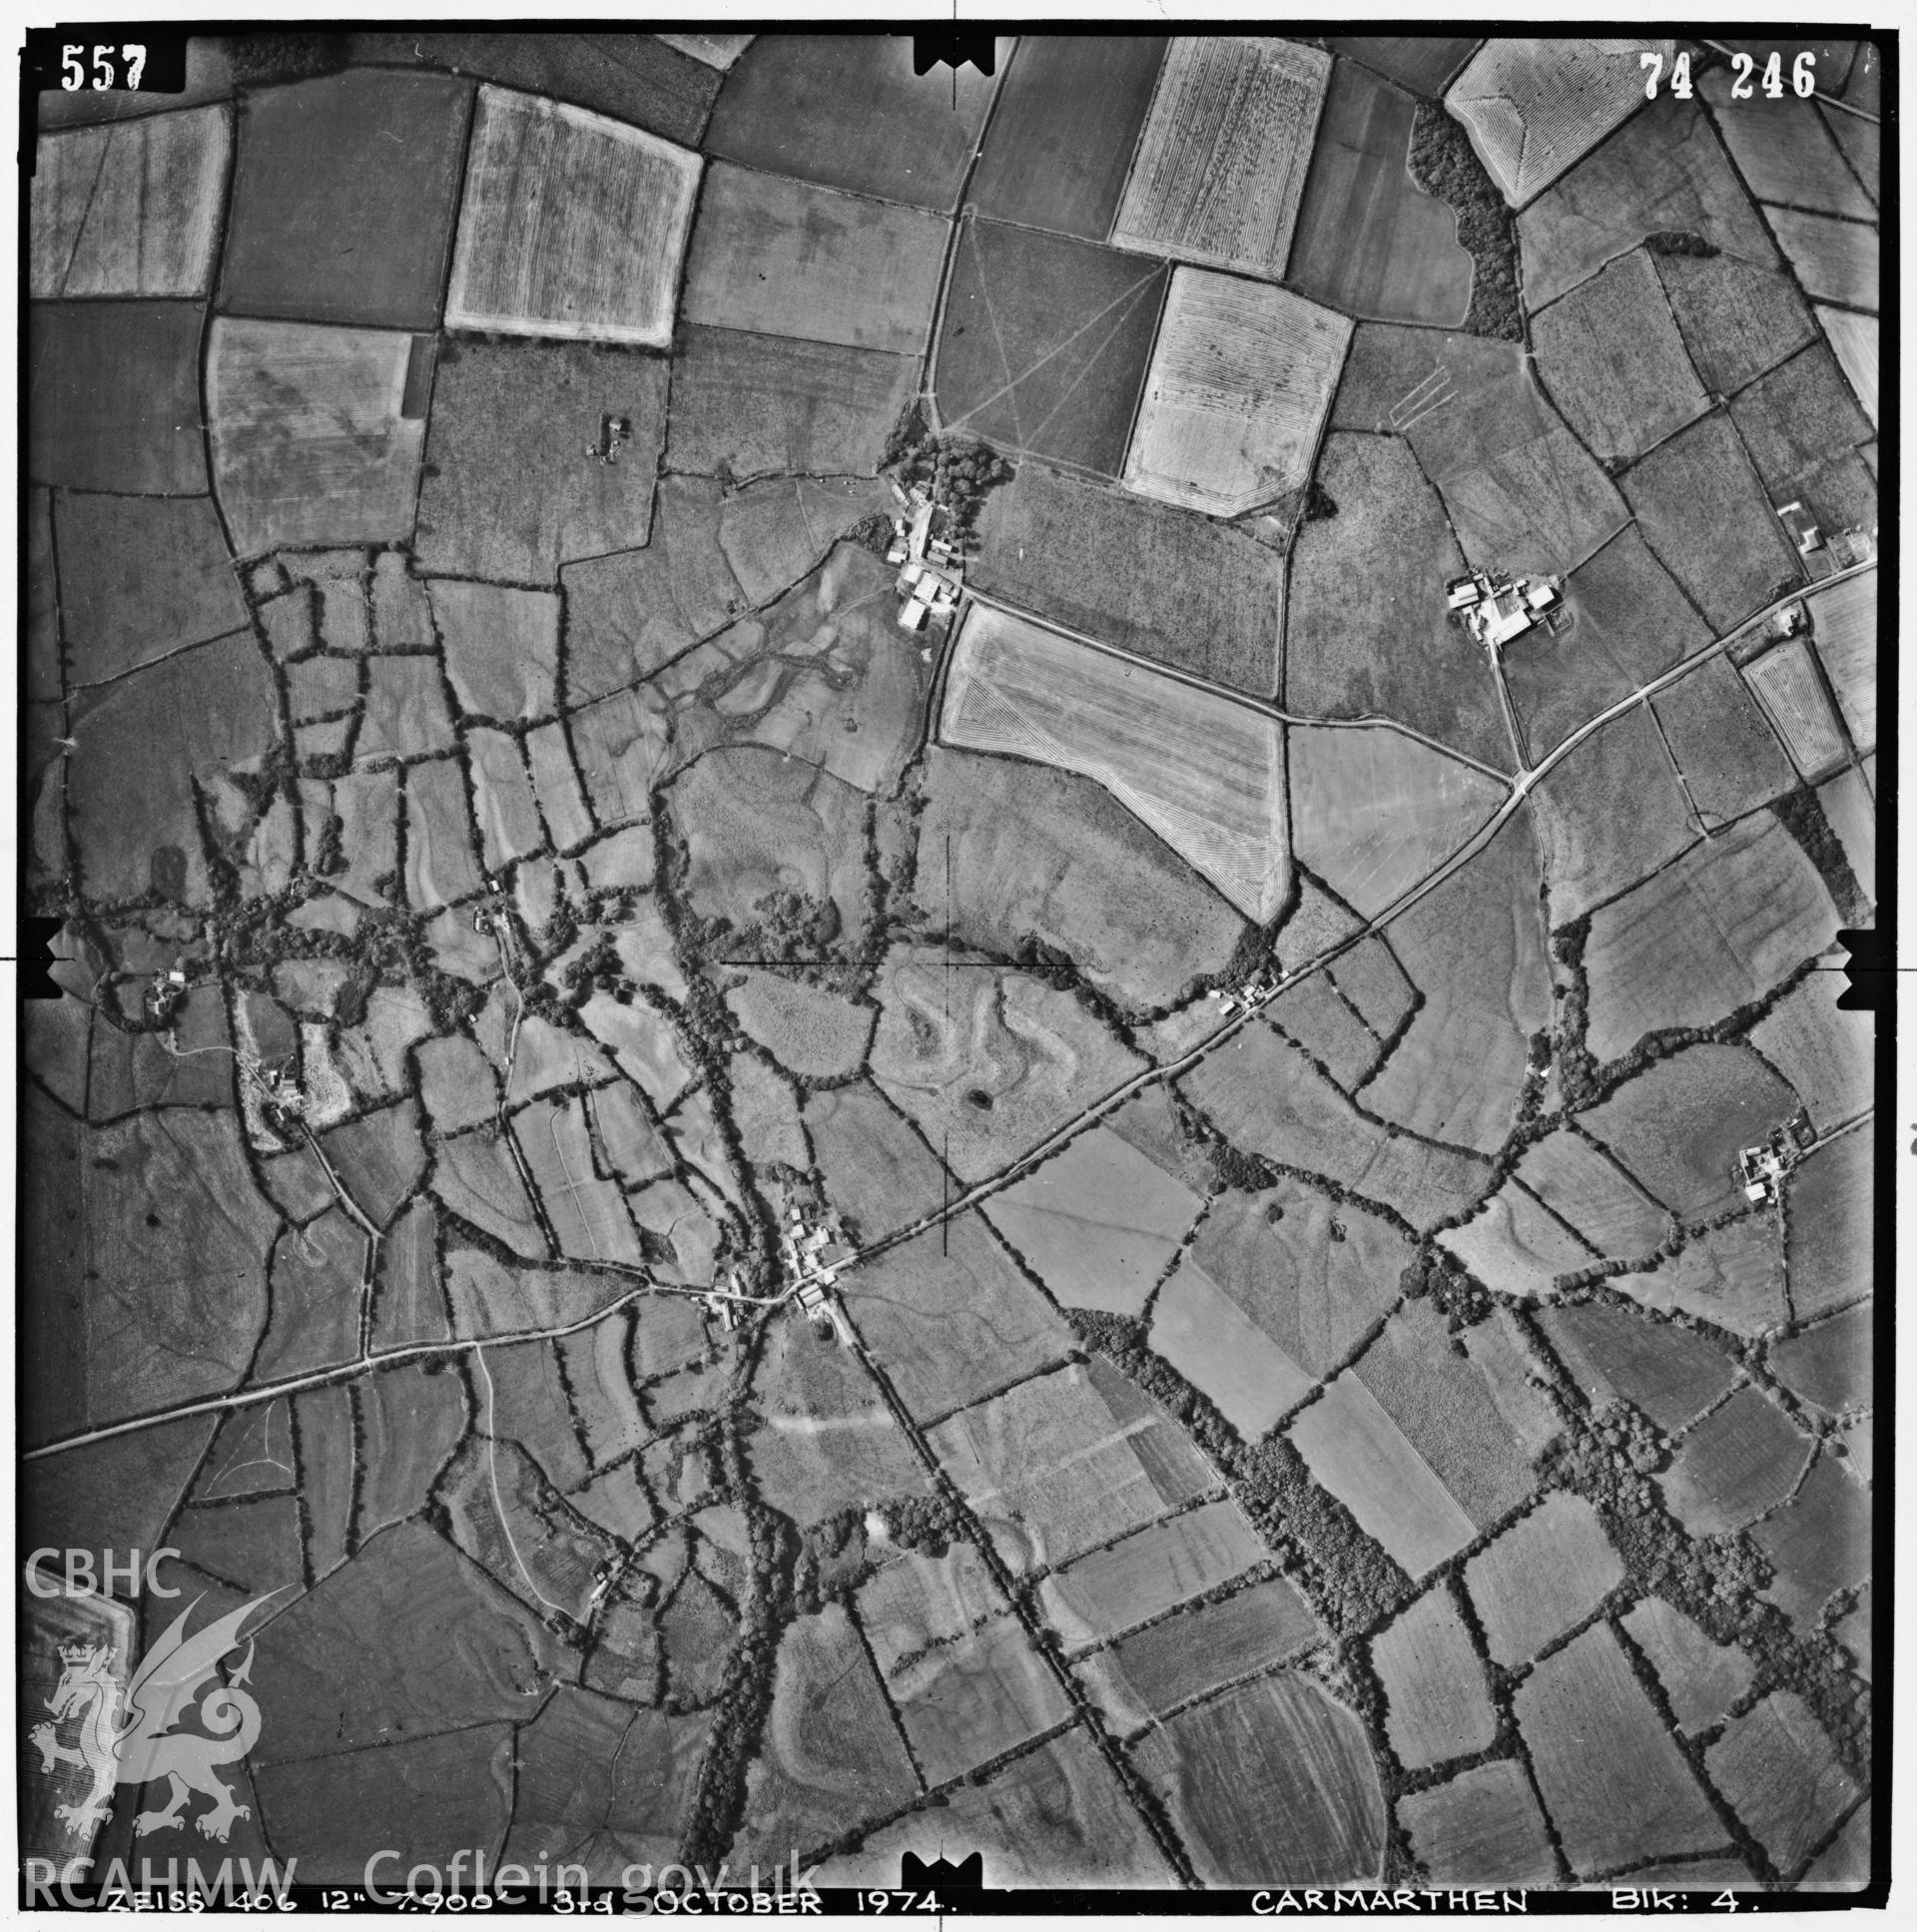 Digitized copy of an aerial photograph showing the area around Beulah, taken by Ordnance Survey, 1974.